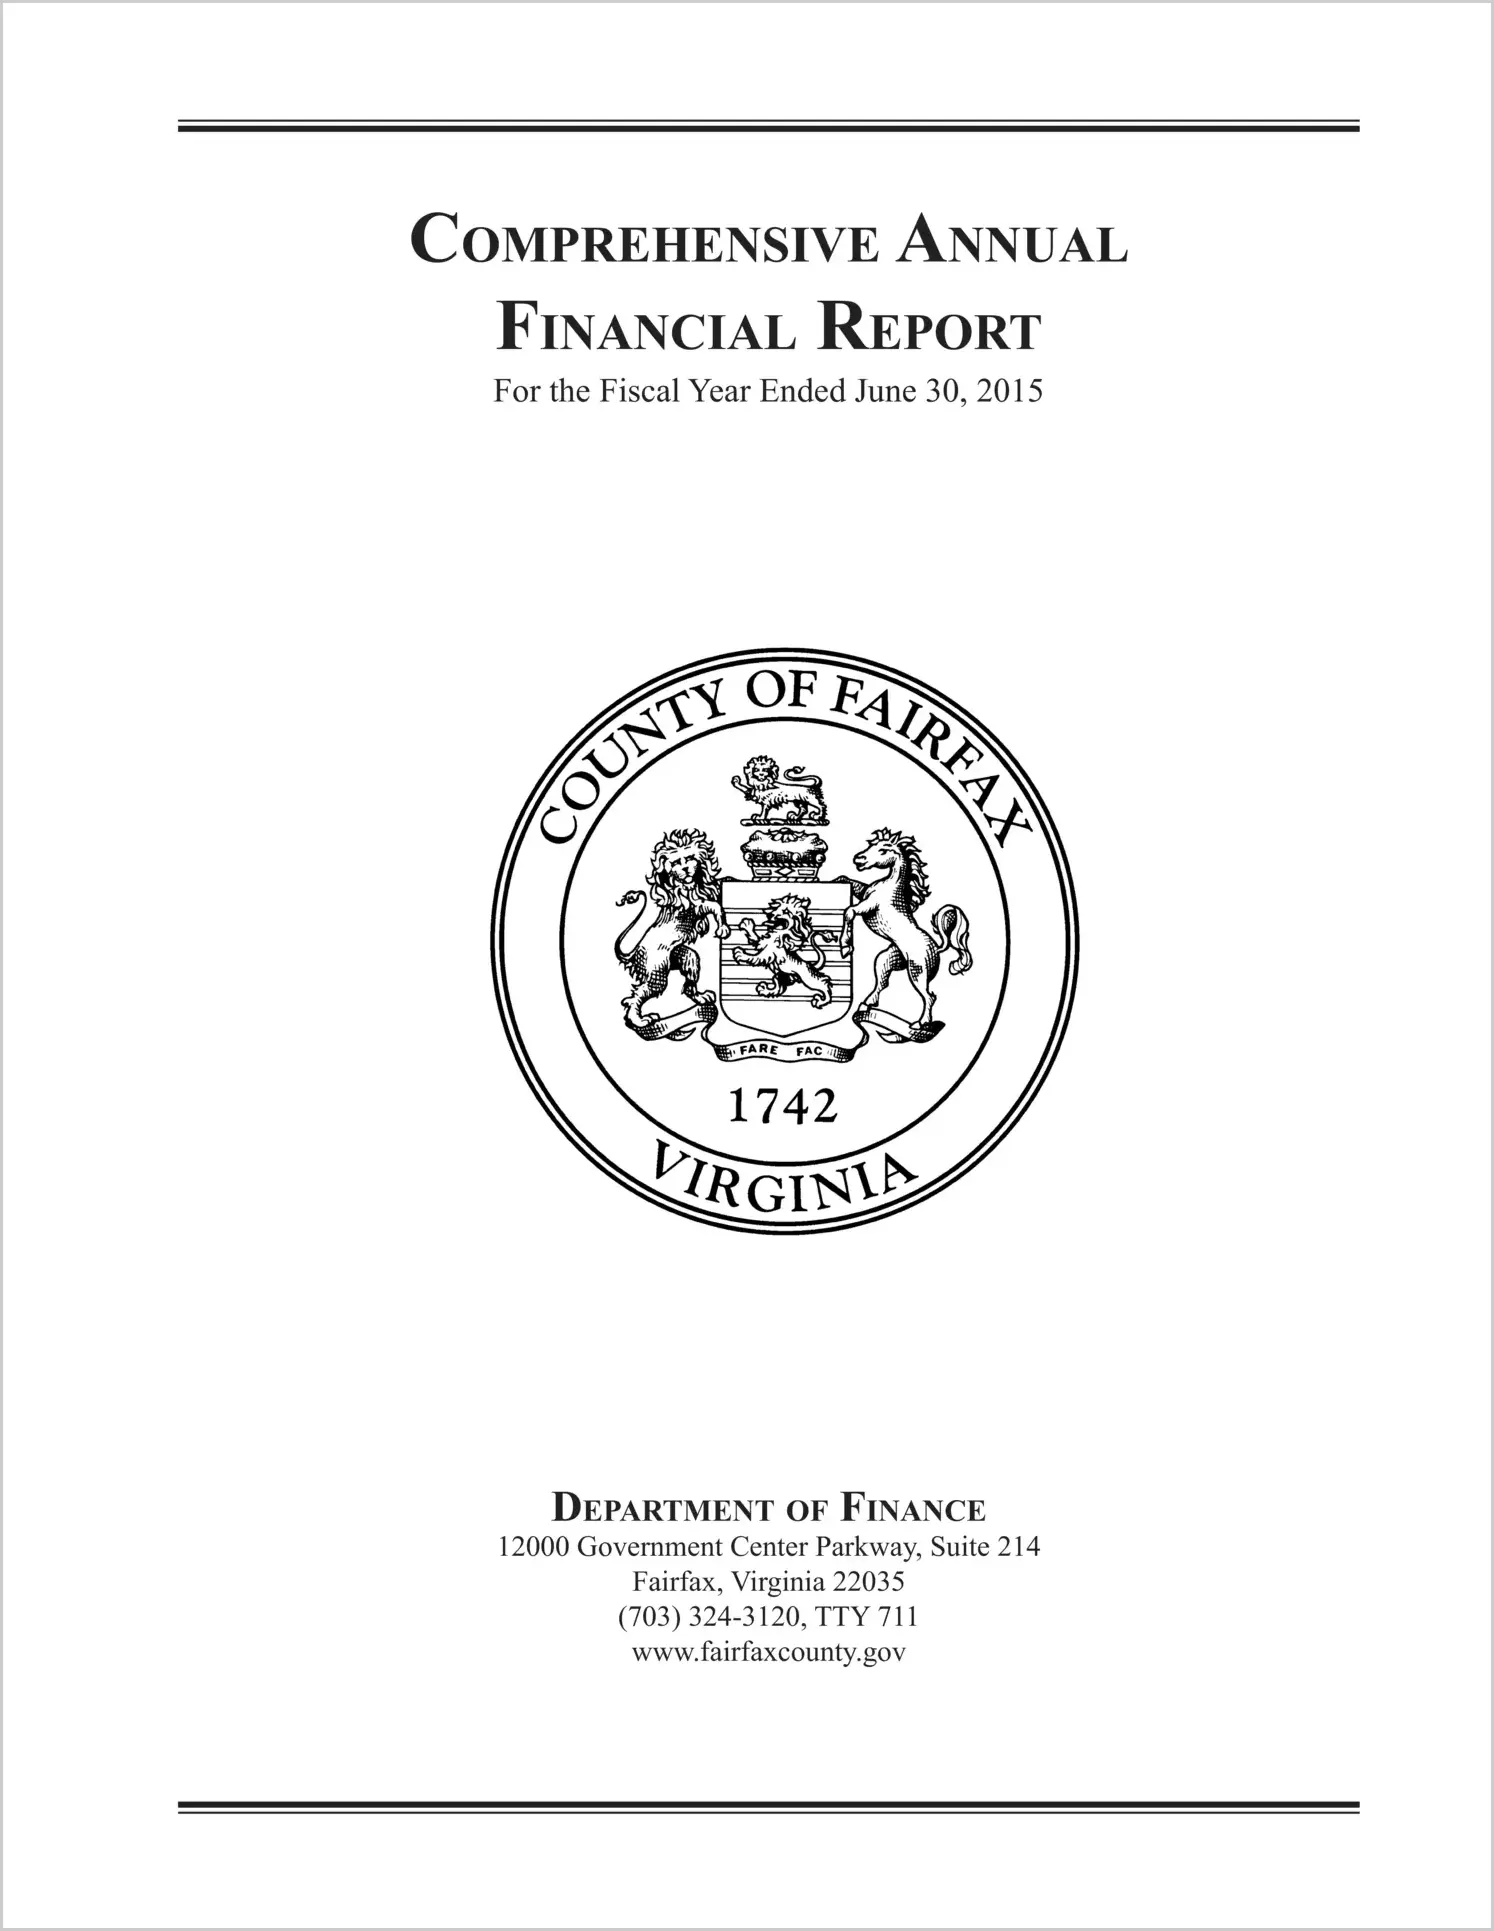 2015 Annual Financial Report for County of Fairfax